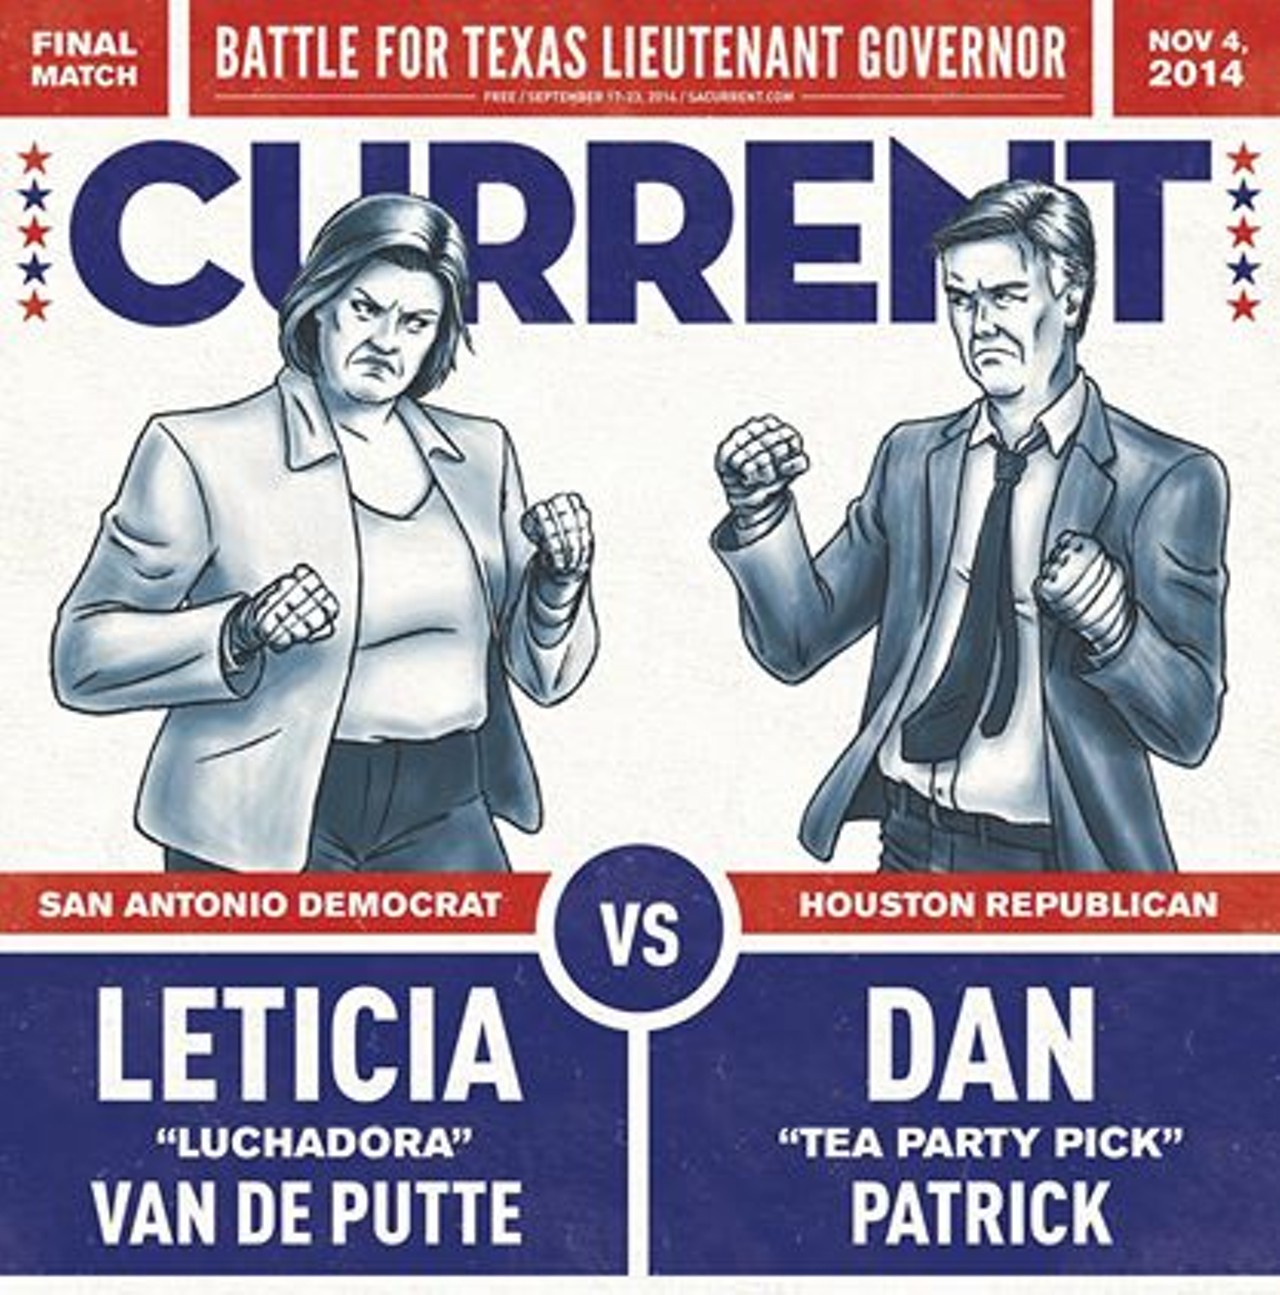 [Related: Lt. Governor Race: the 'Luchadora' vs. the Tea Party radio host]